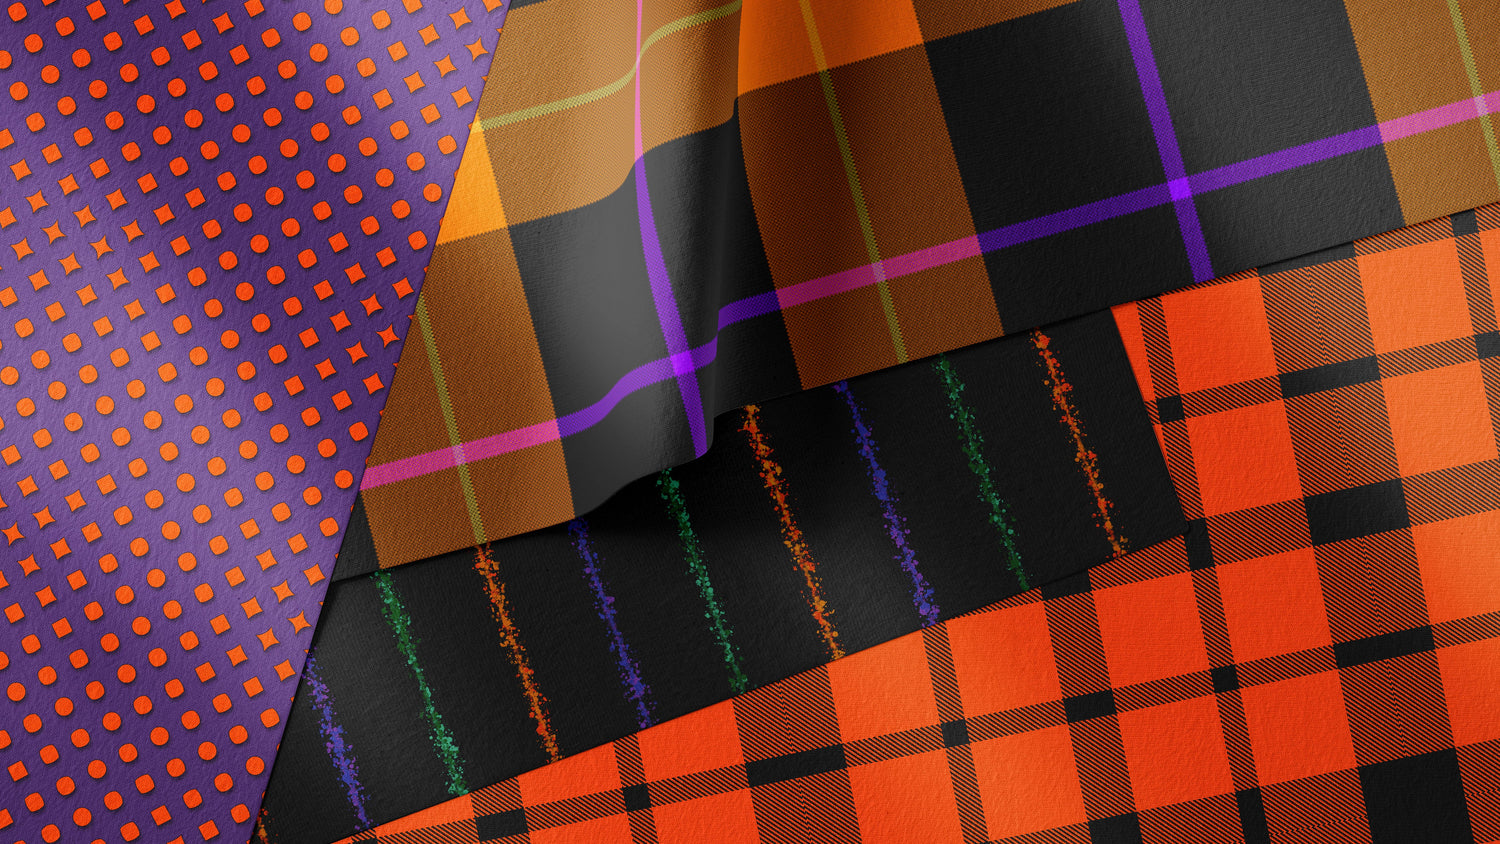 Four fabrics with patterns in halloween colors of orange, black, purple, and green.